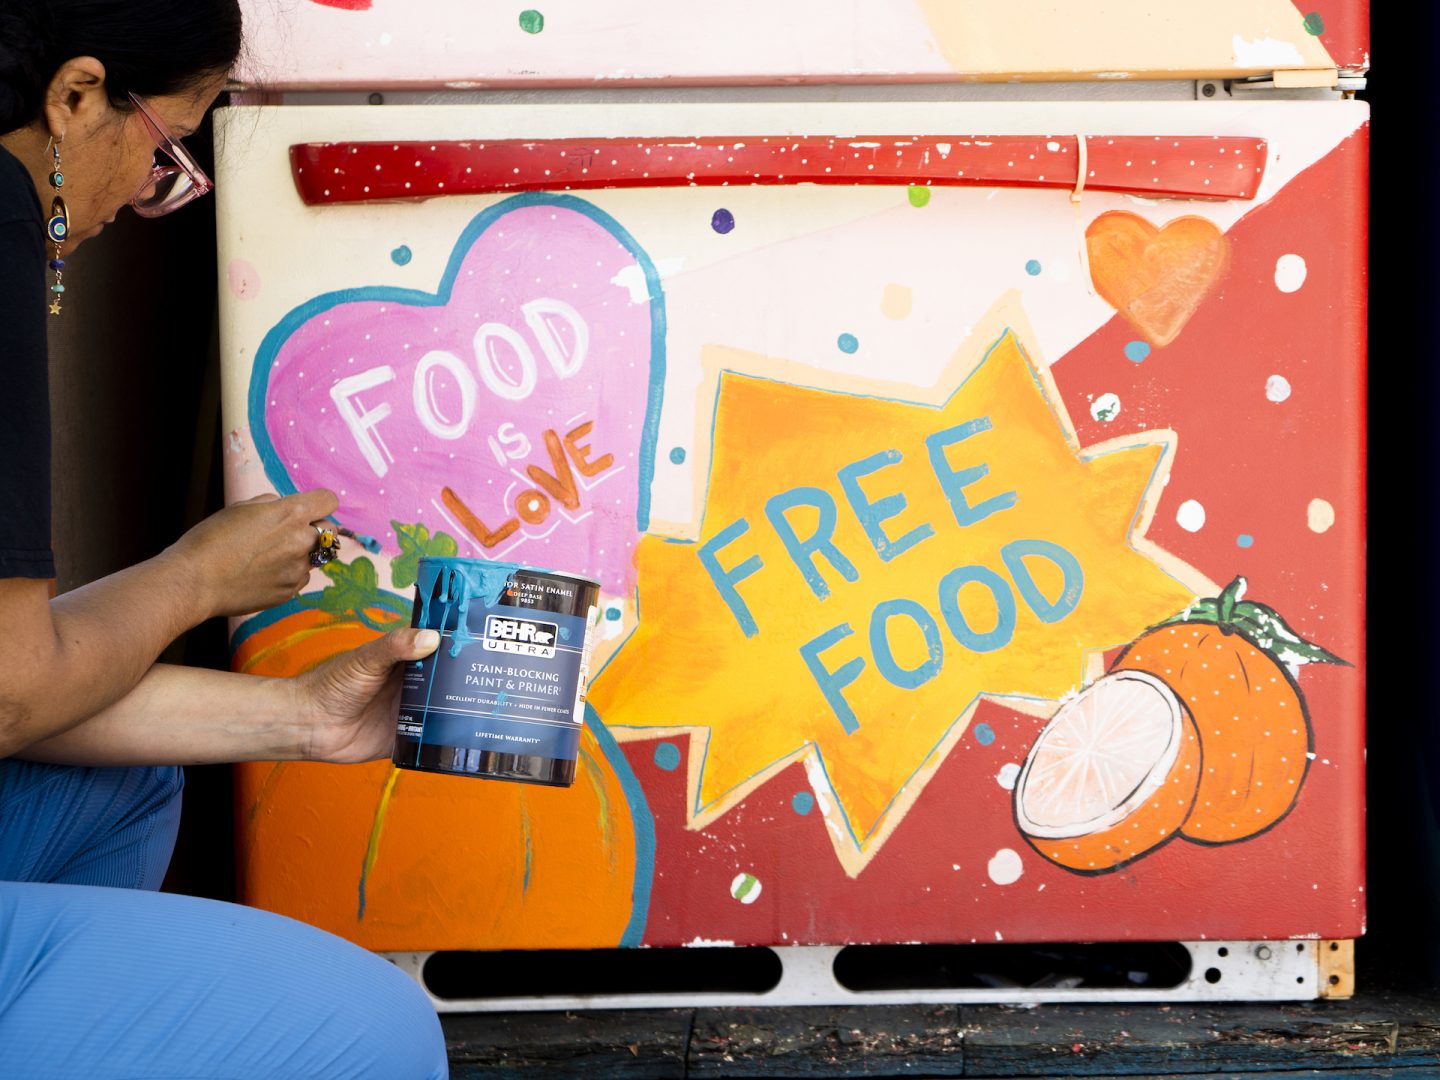 Image features a person on the left painting the bottom of a refrigerator. A pink star with a blue outlines reads "Food is Love", and a orange star with a yellow outline reads "Free Food". There are oranges in the bottom right corner of the refrigerator.